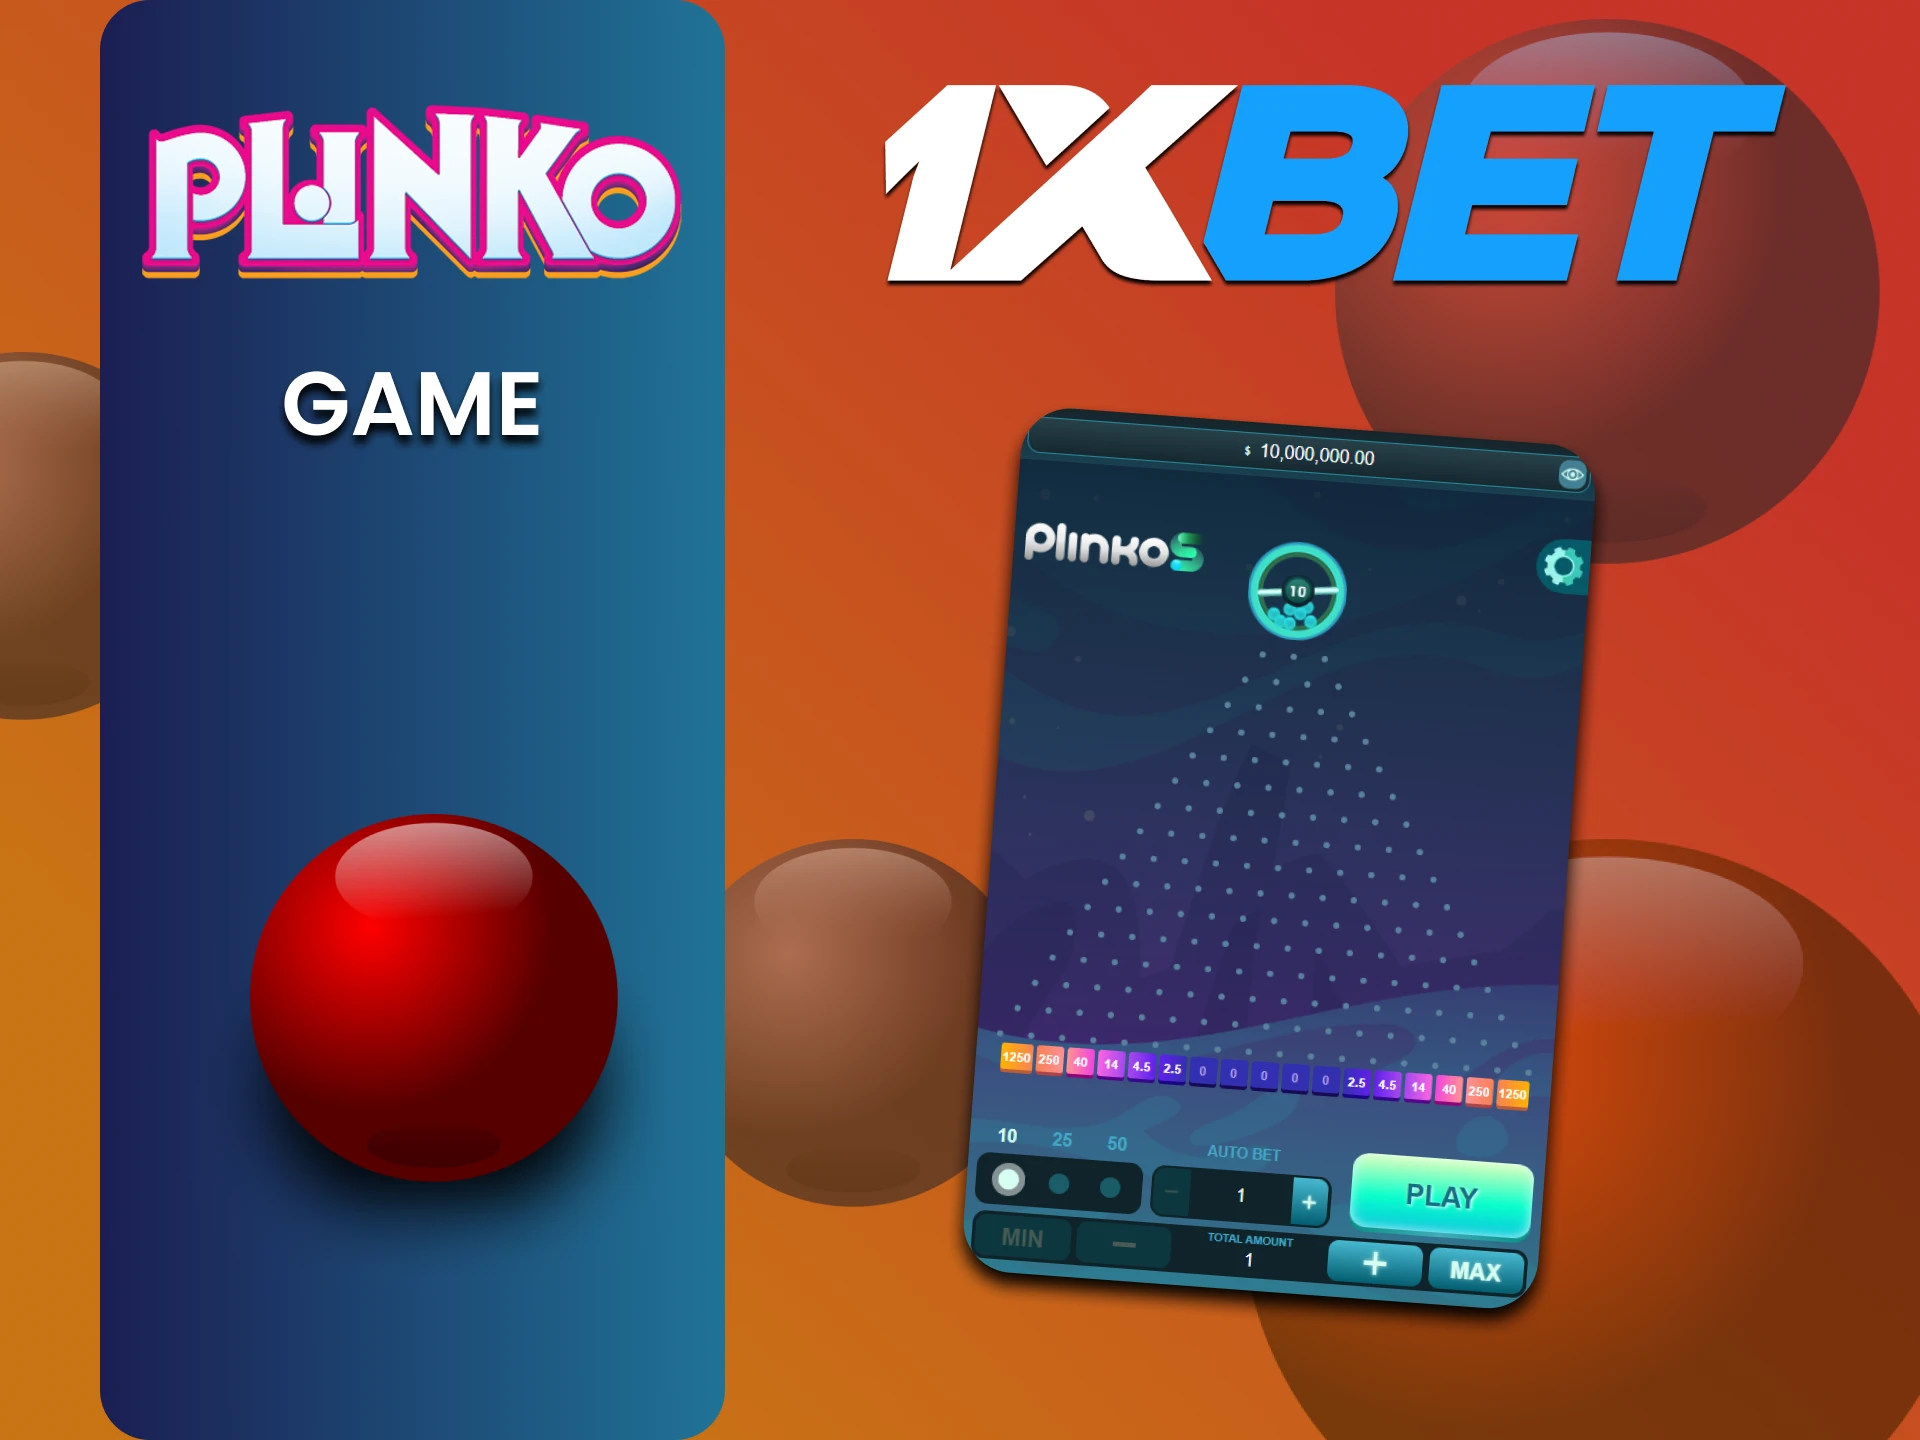 Find out everything about the Plinko game on the 1xbet website.